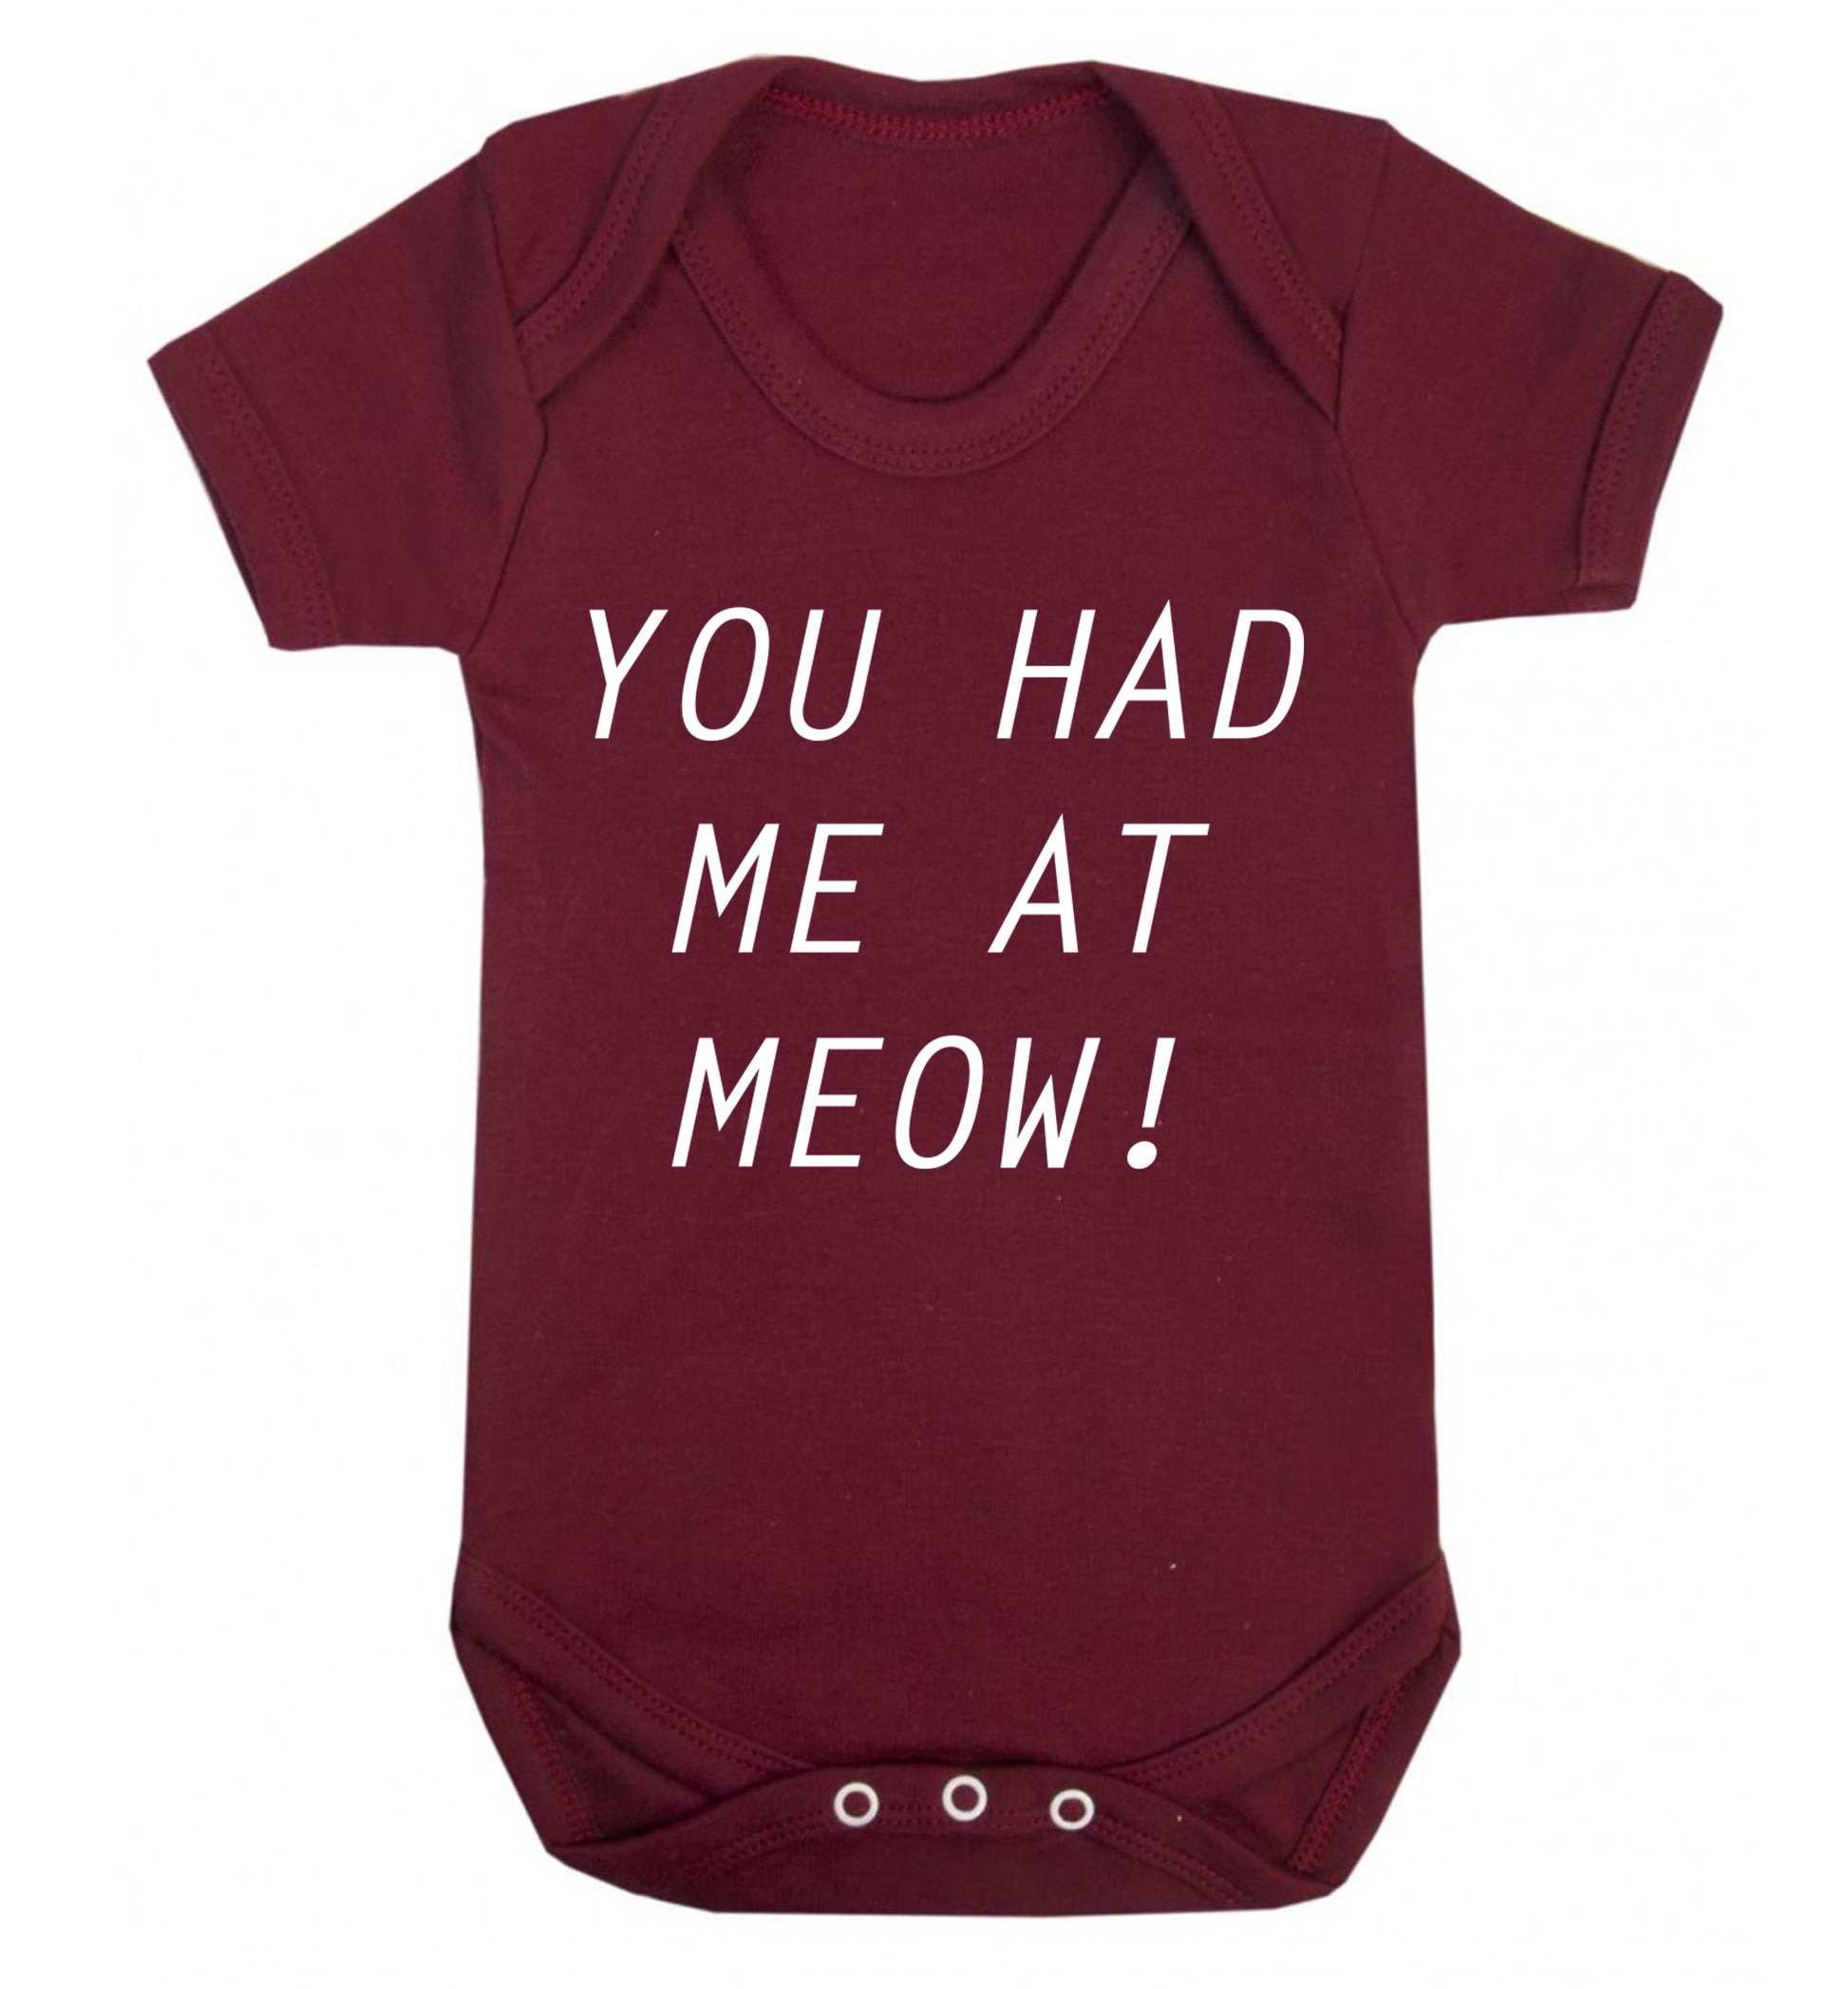 You had me at meow Baby Vest maroon 18-24 months